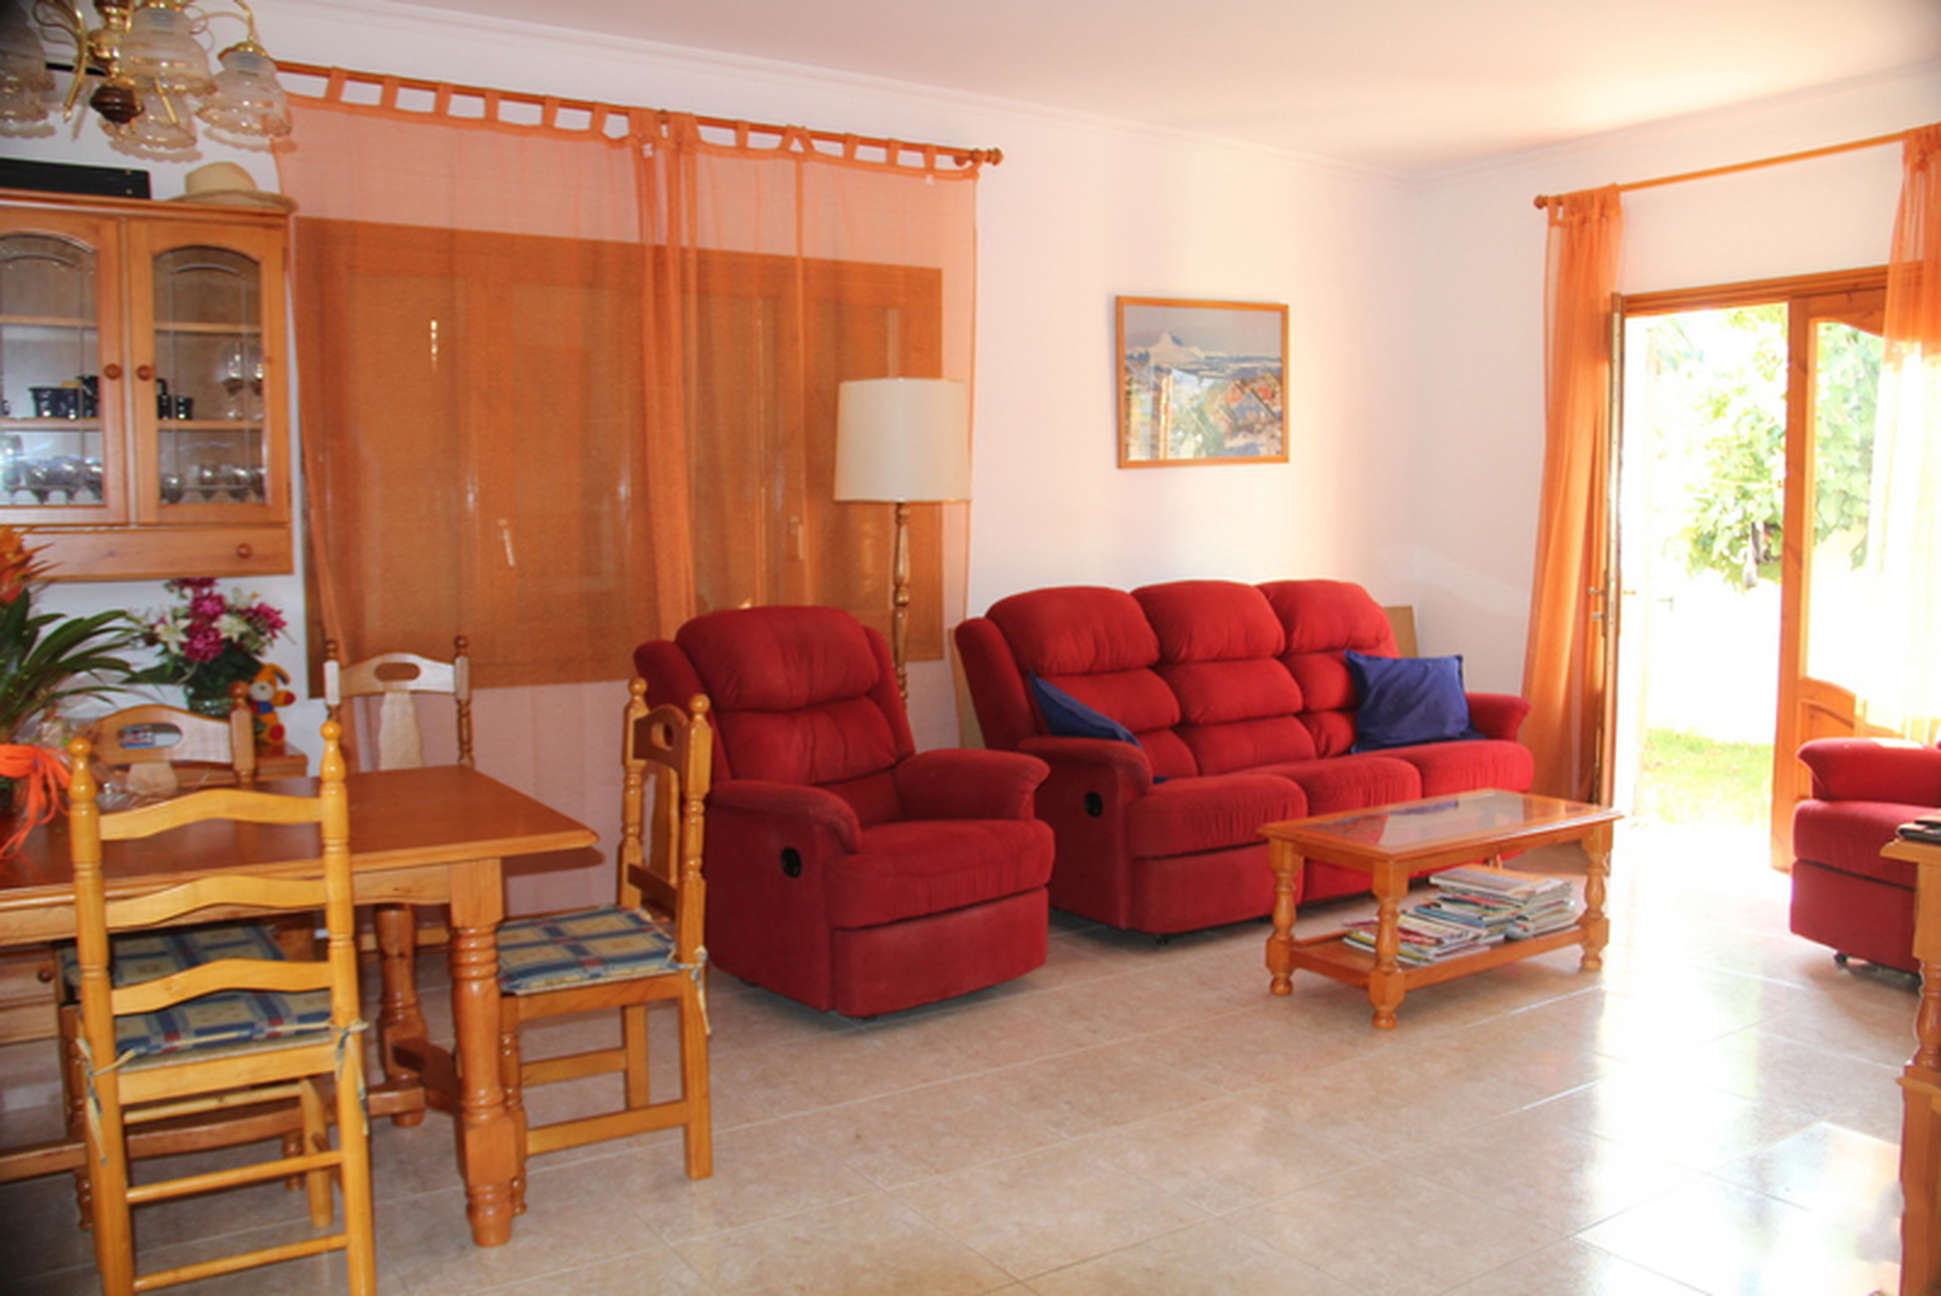 Empuriabrava, house for sale with pool and garden